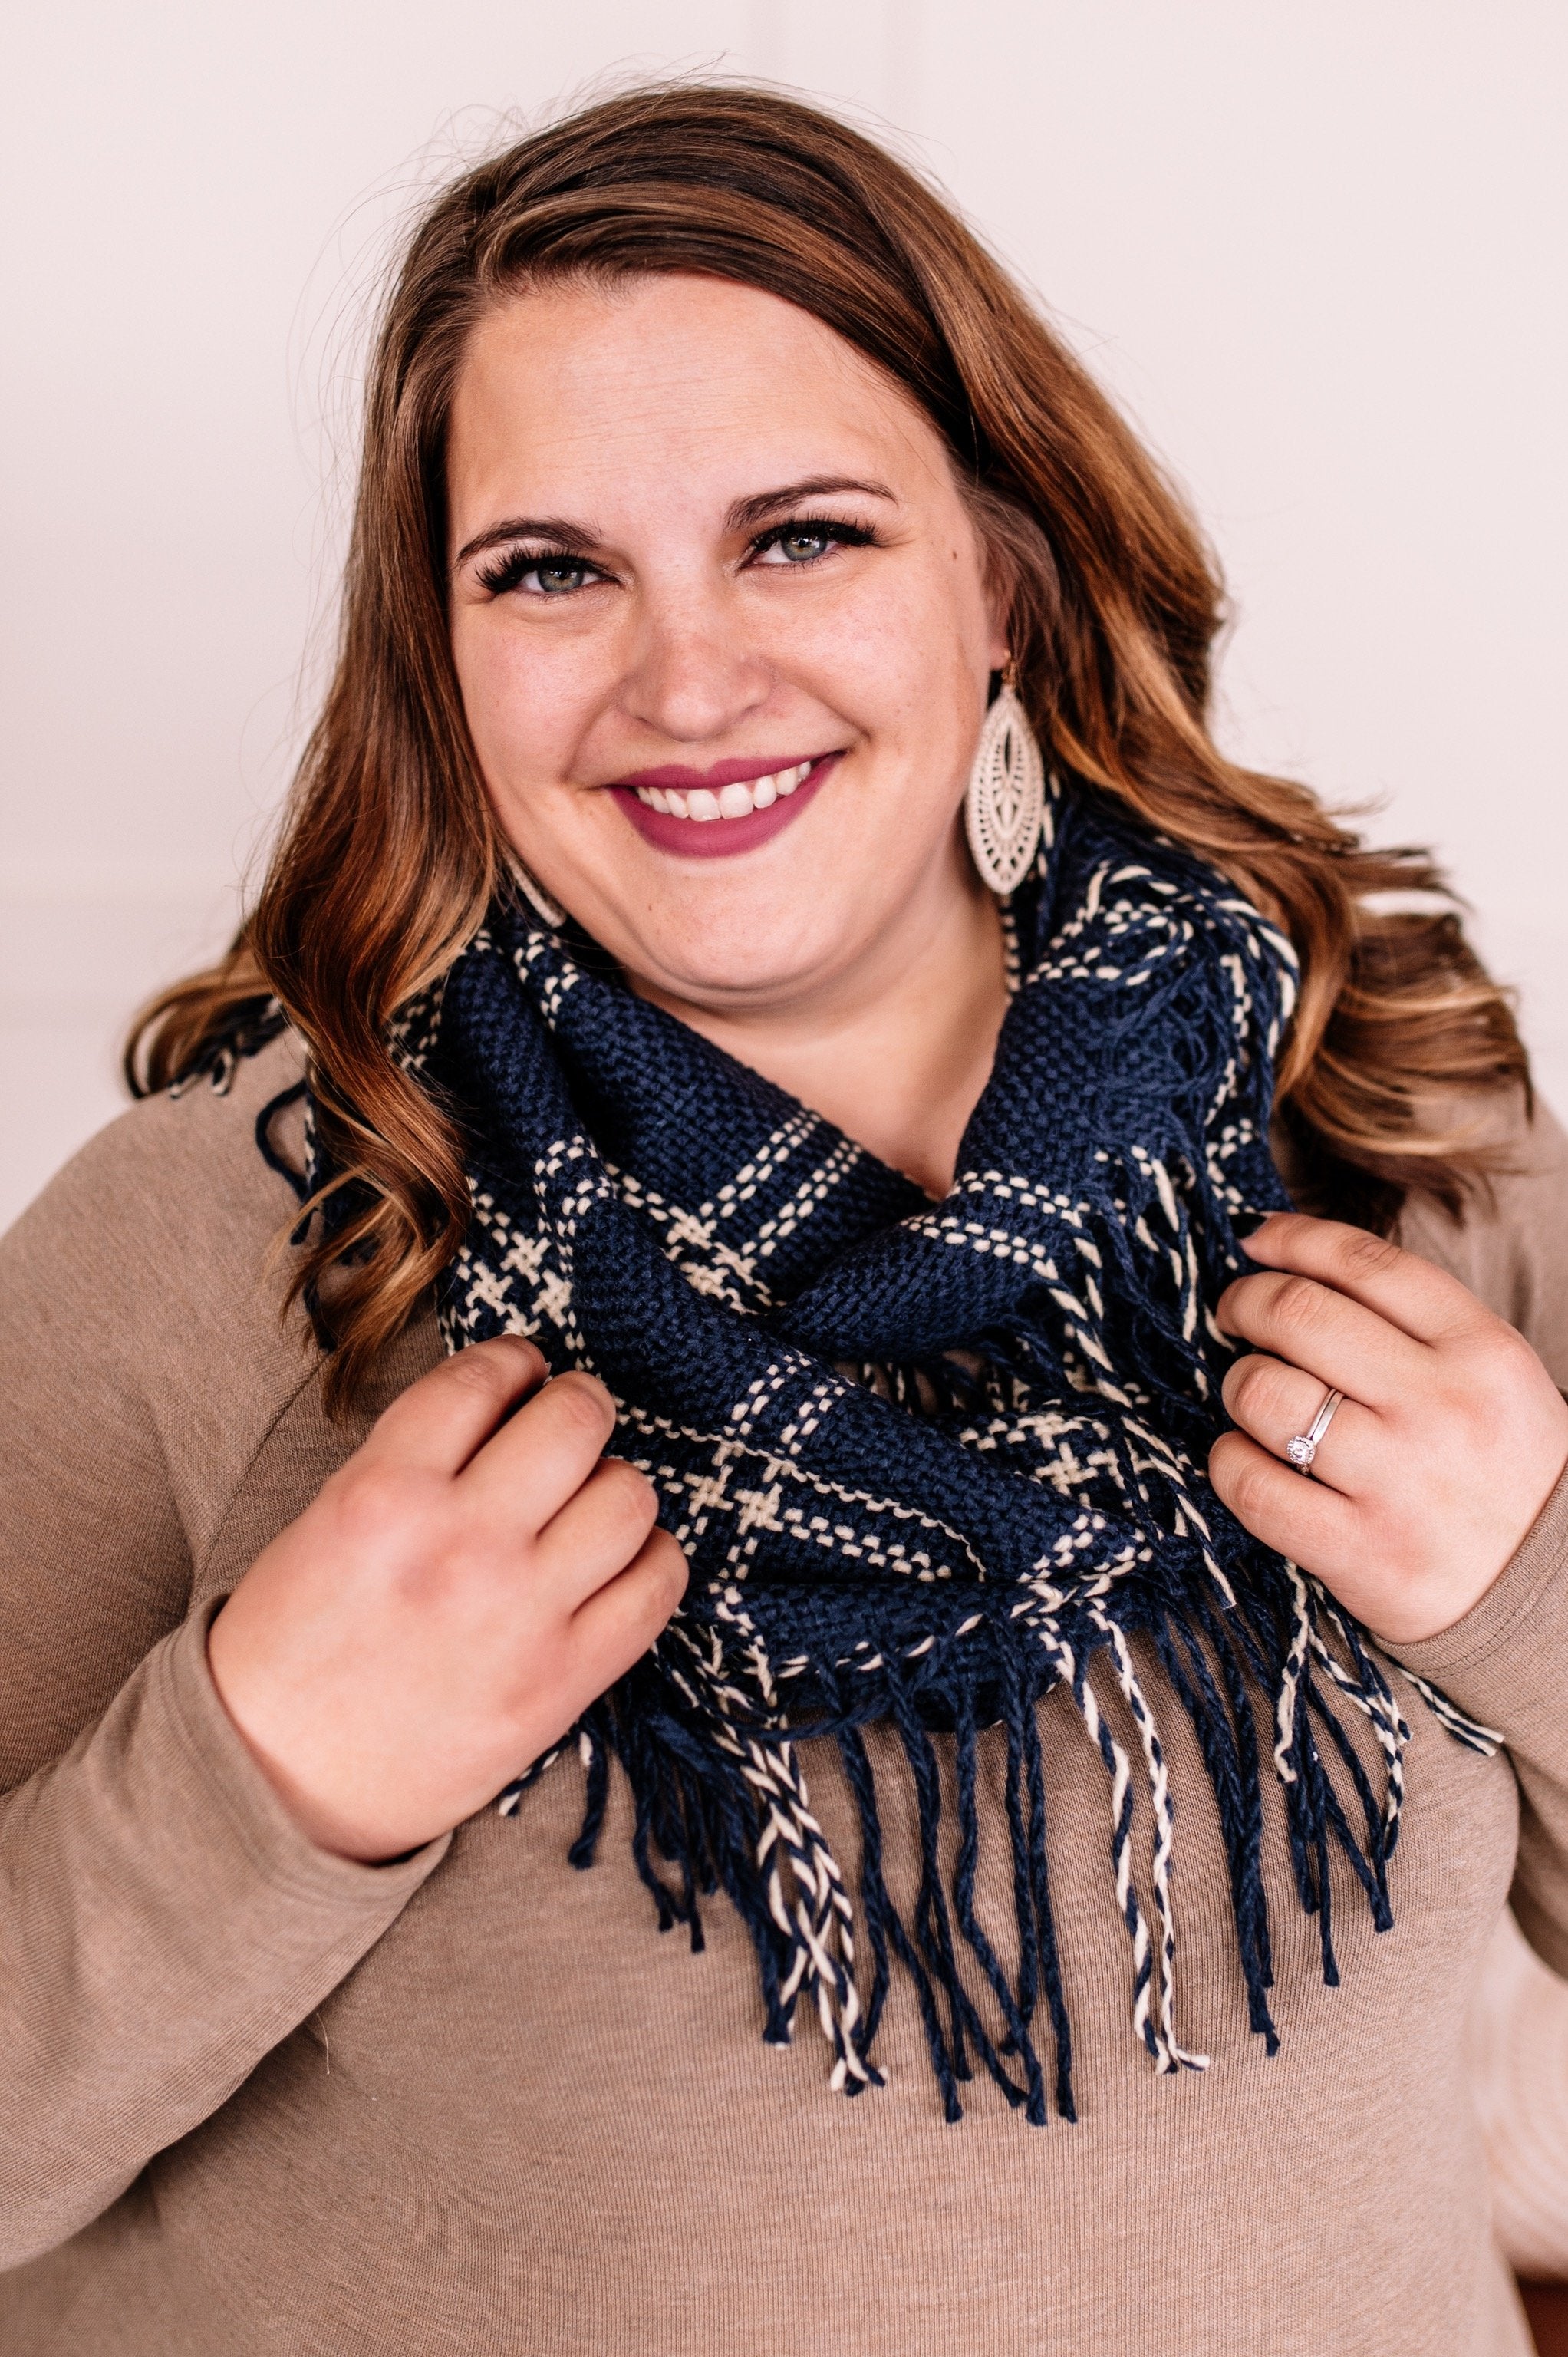 Tied Up In You In Navy and Cream Knit Infinity Scarf